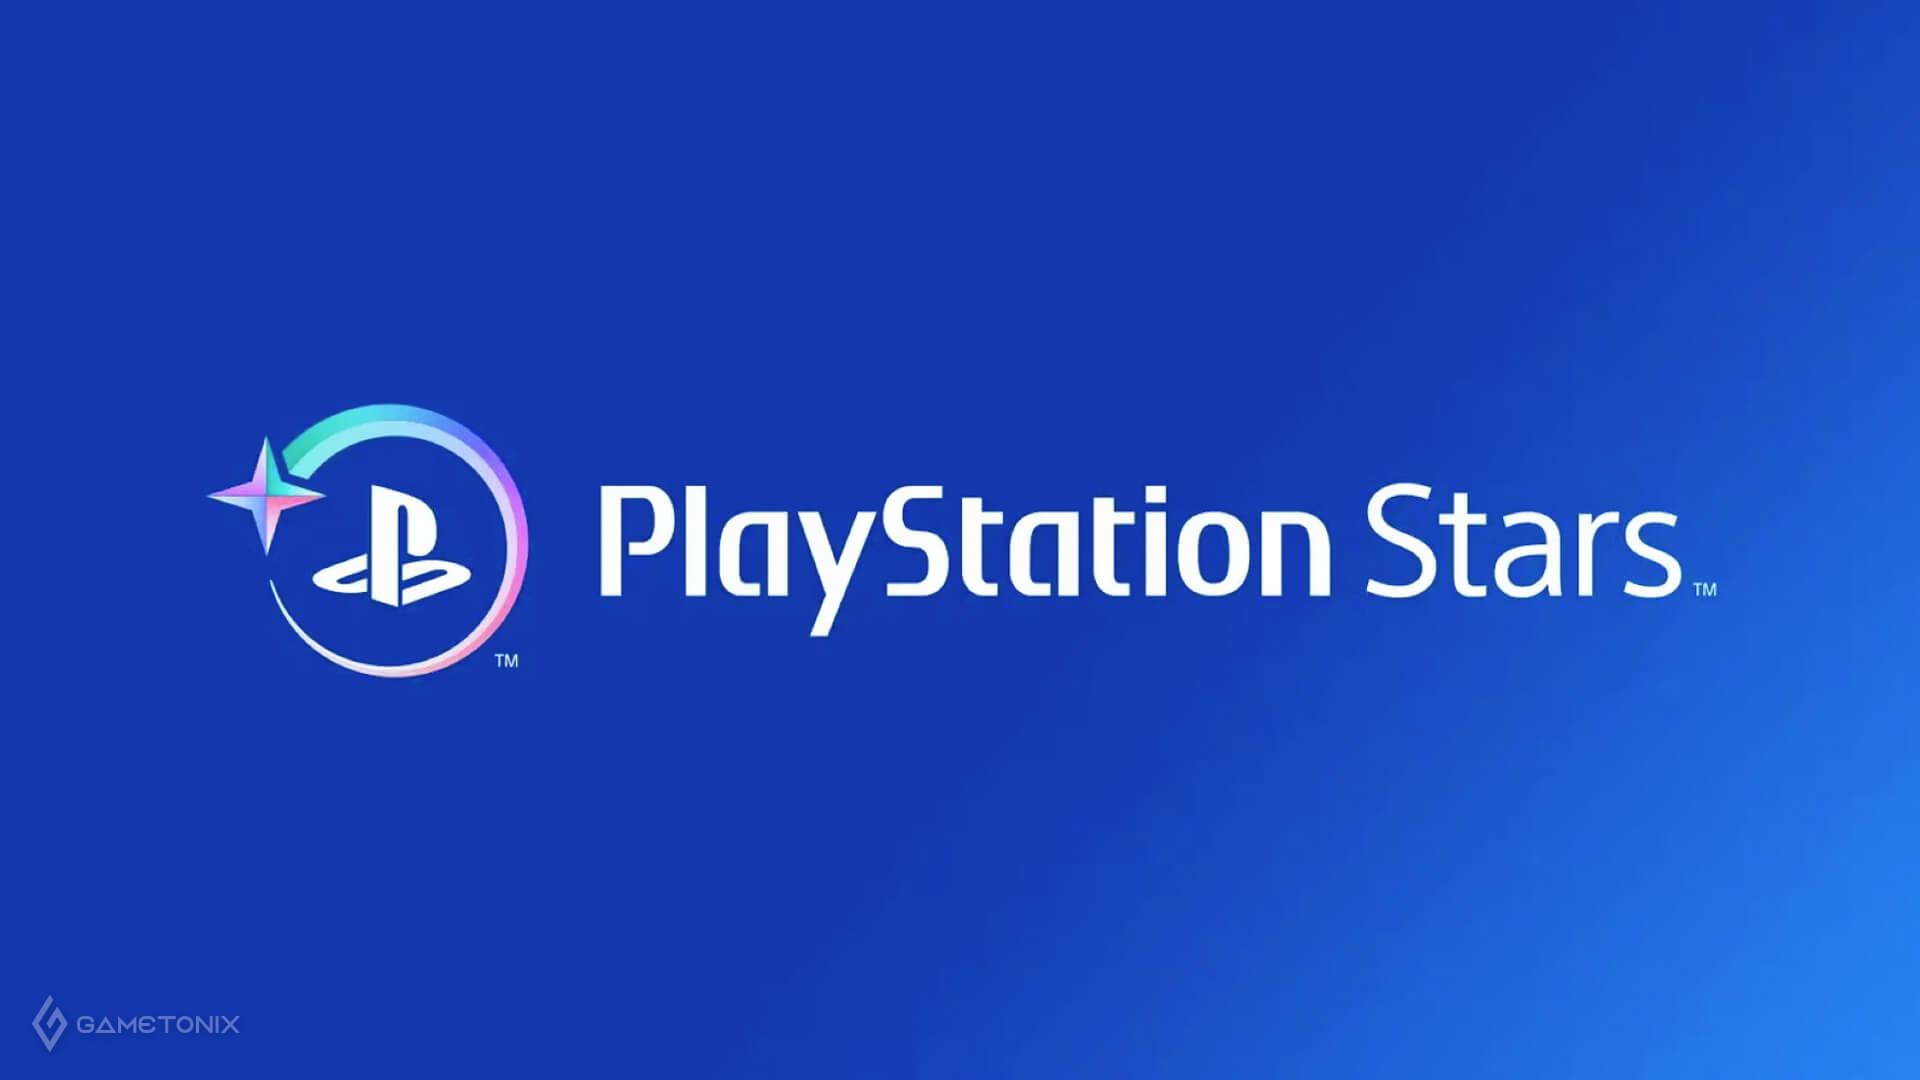 Sony will Lanuch PlayStation Stars end of Year 2022